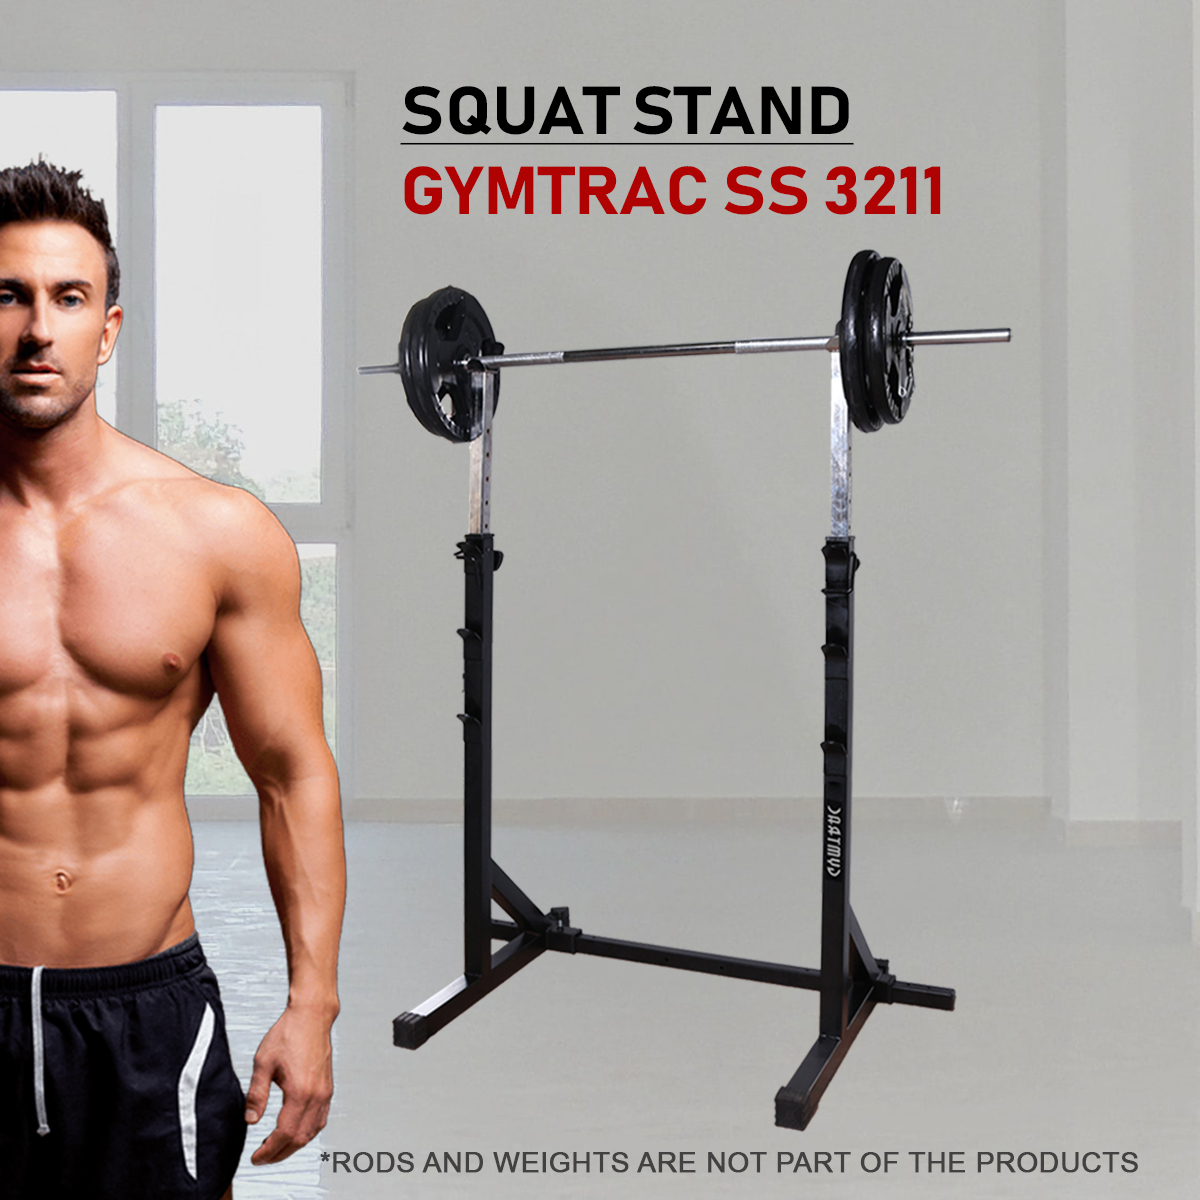 GYMTRAC SS 3211 SQUAT STAND